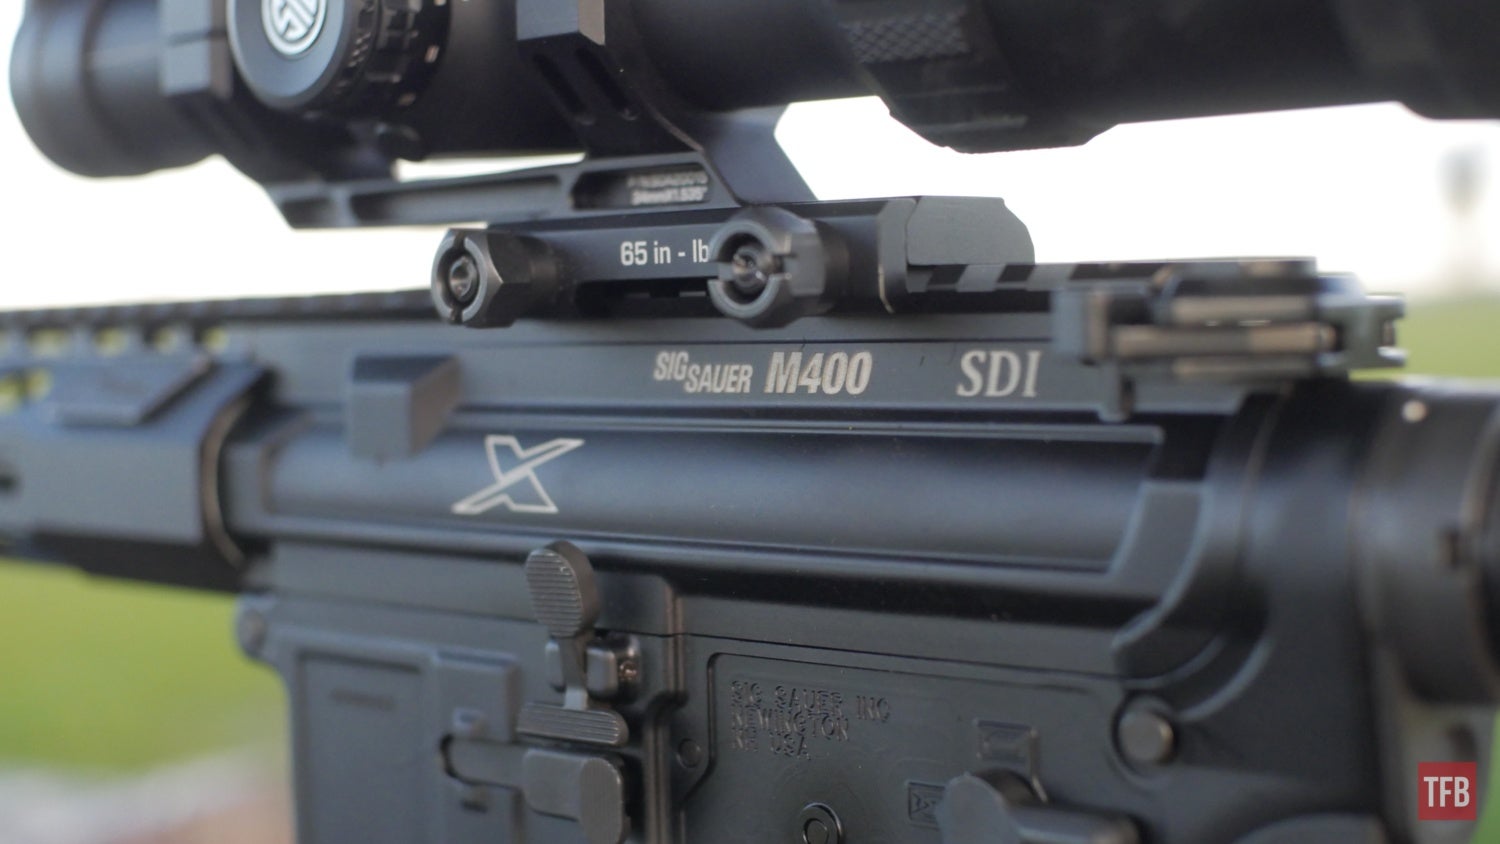 TFB Review: The Full-Featured SIG M400 SDI XSERIES